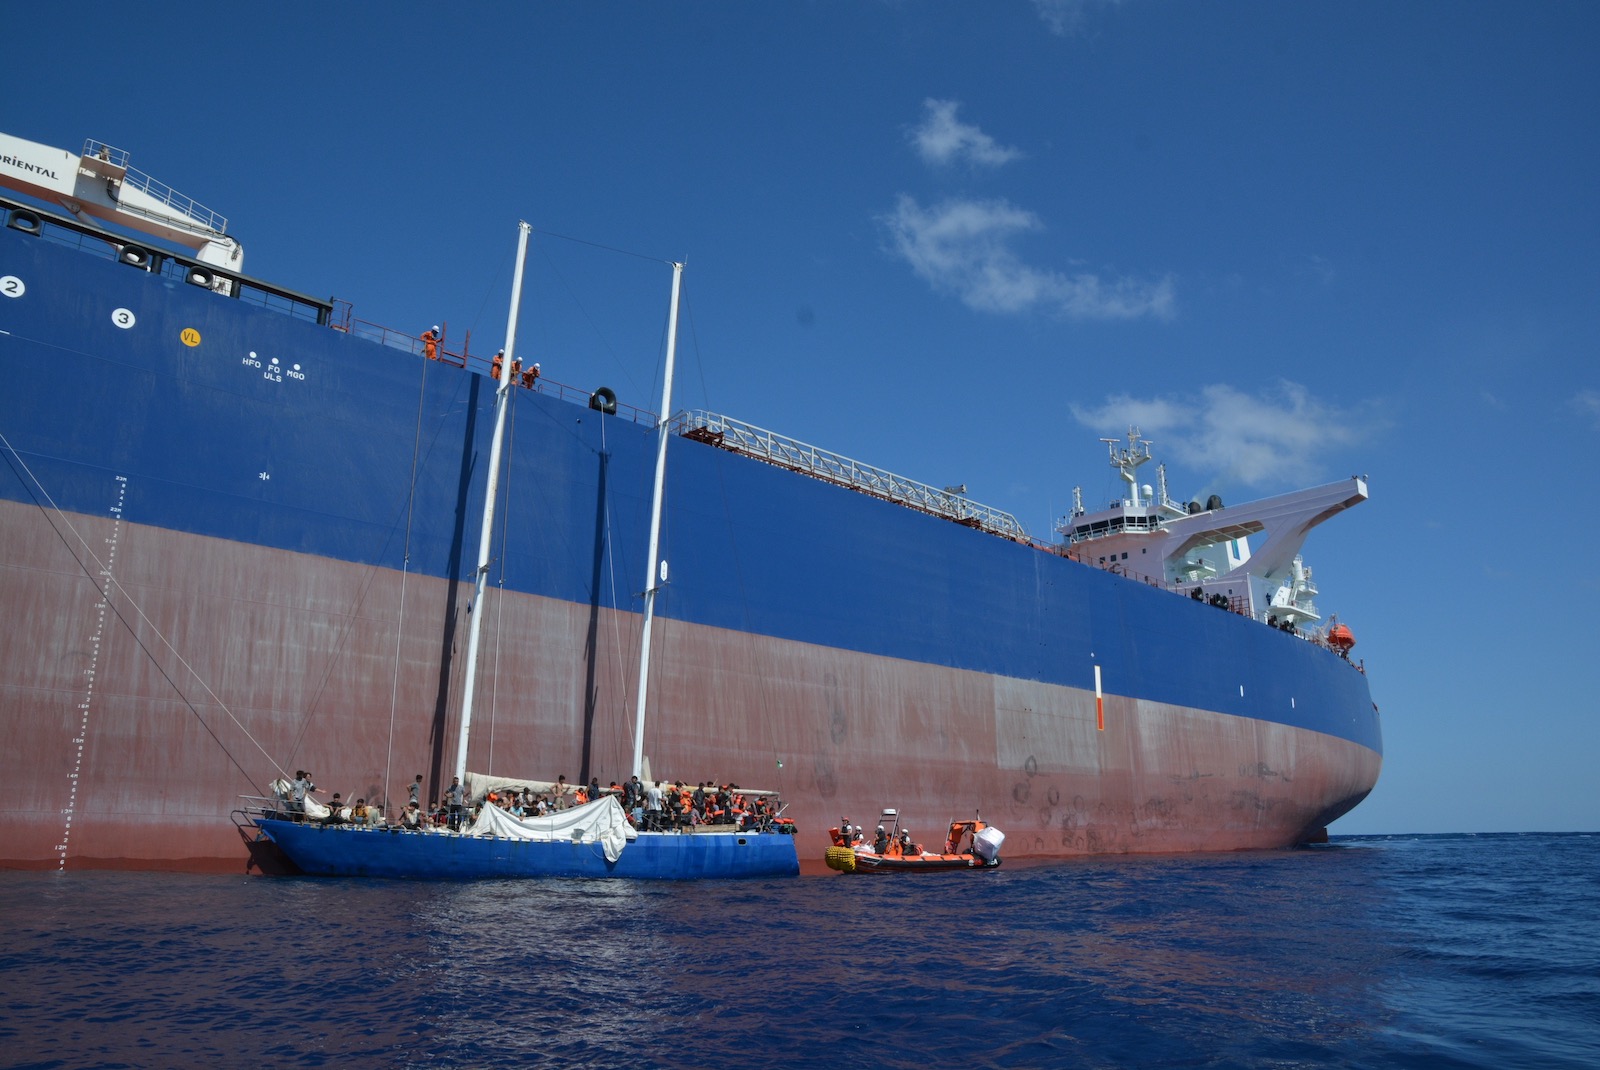 A small boat clinging to the side of an enormous grey and blue oil tanker at sea